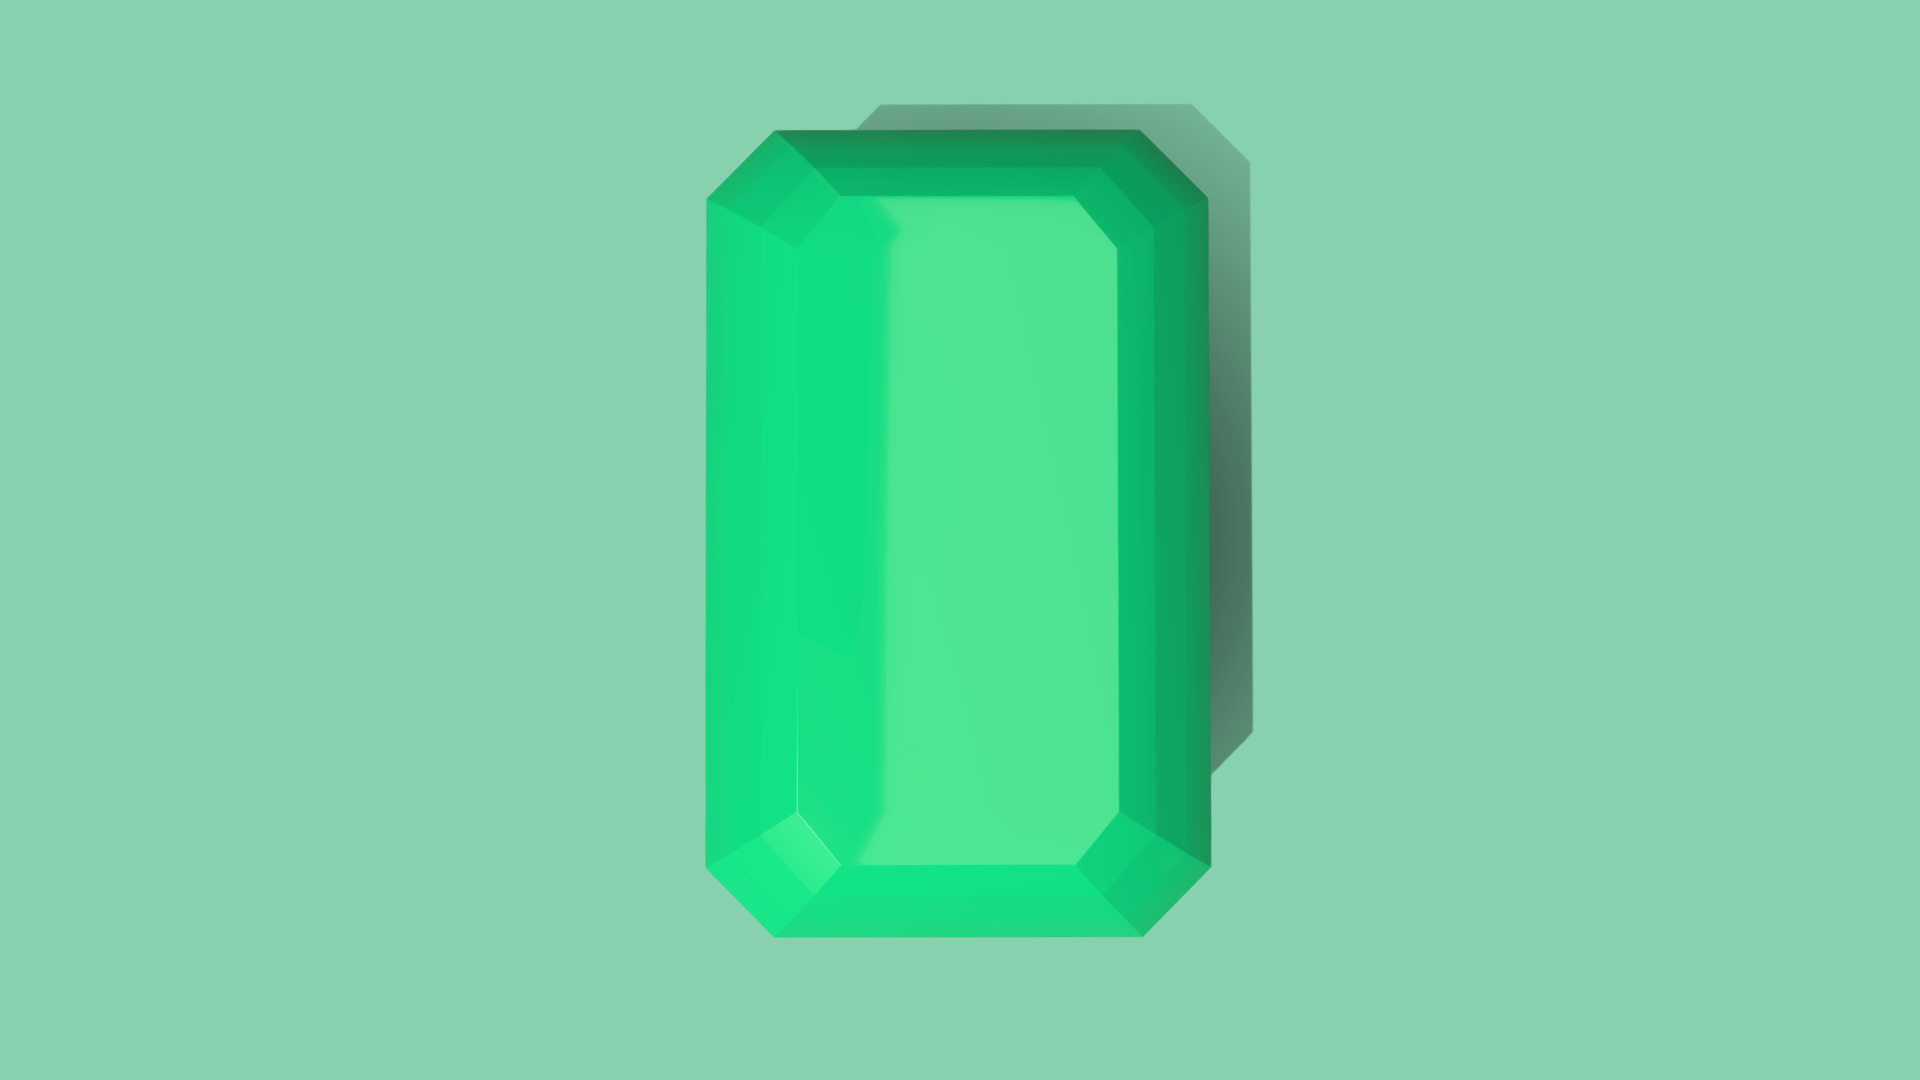 3D model Emerald Gem – Emerald Cut - This is a 3D model of the Emerald Gem - Emerald Cut. The 3D model is about shape, icon.